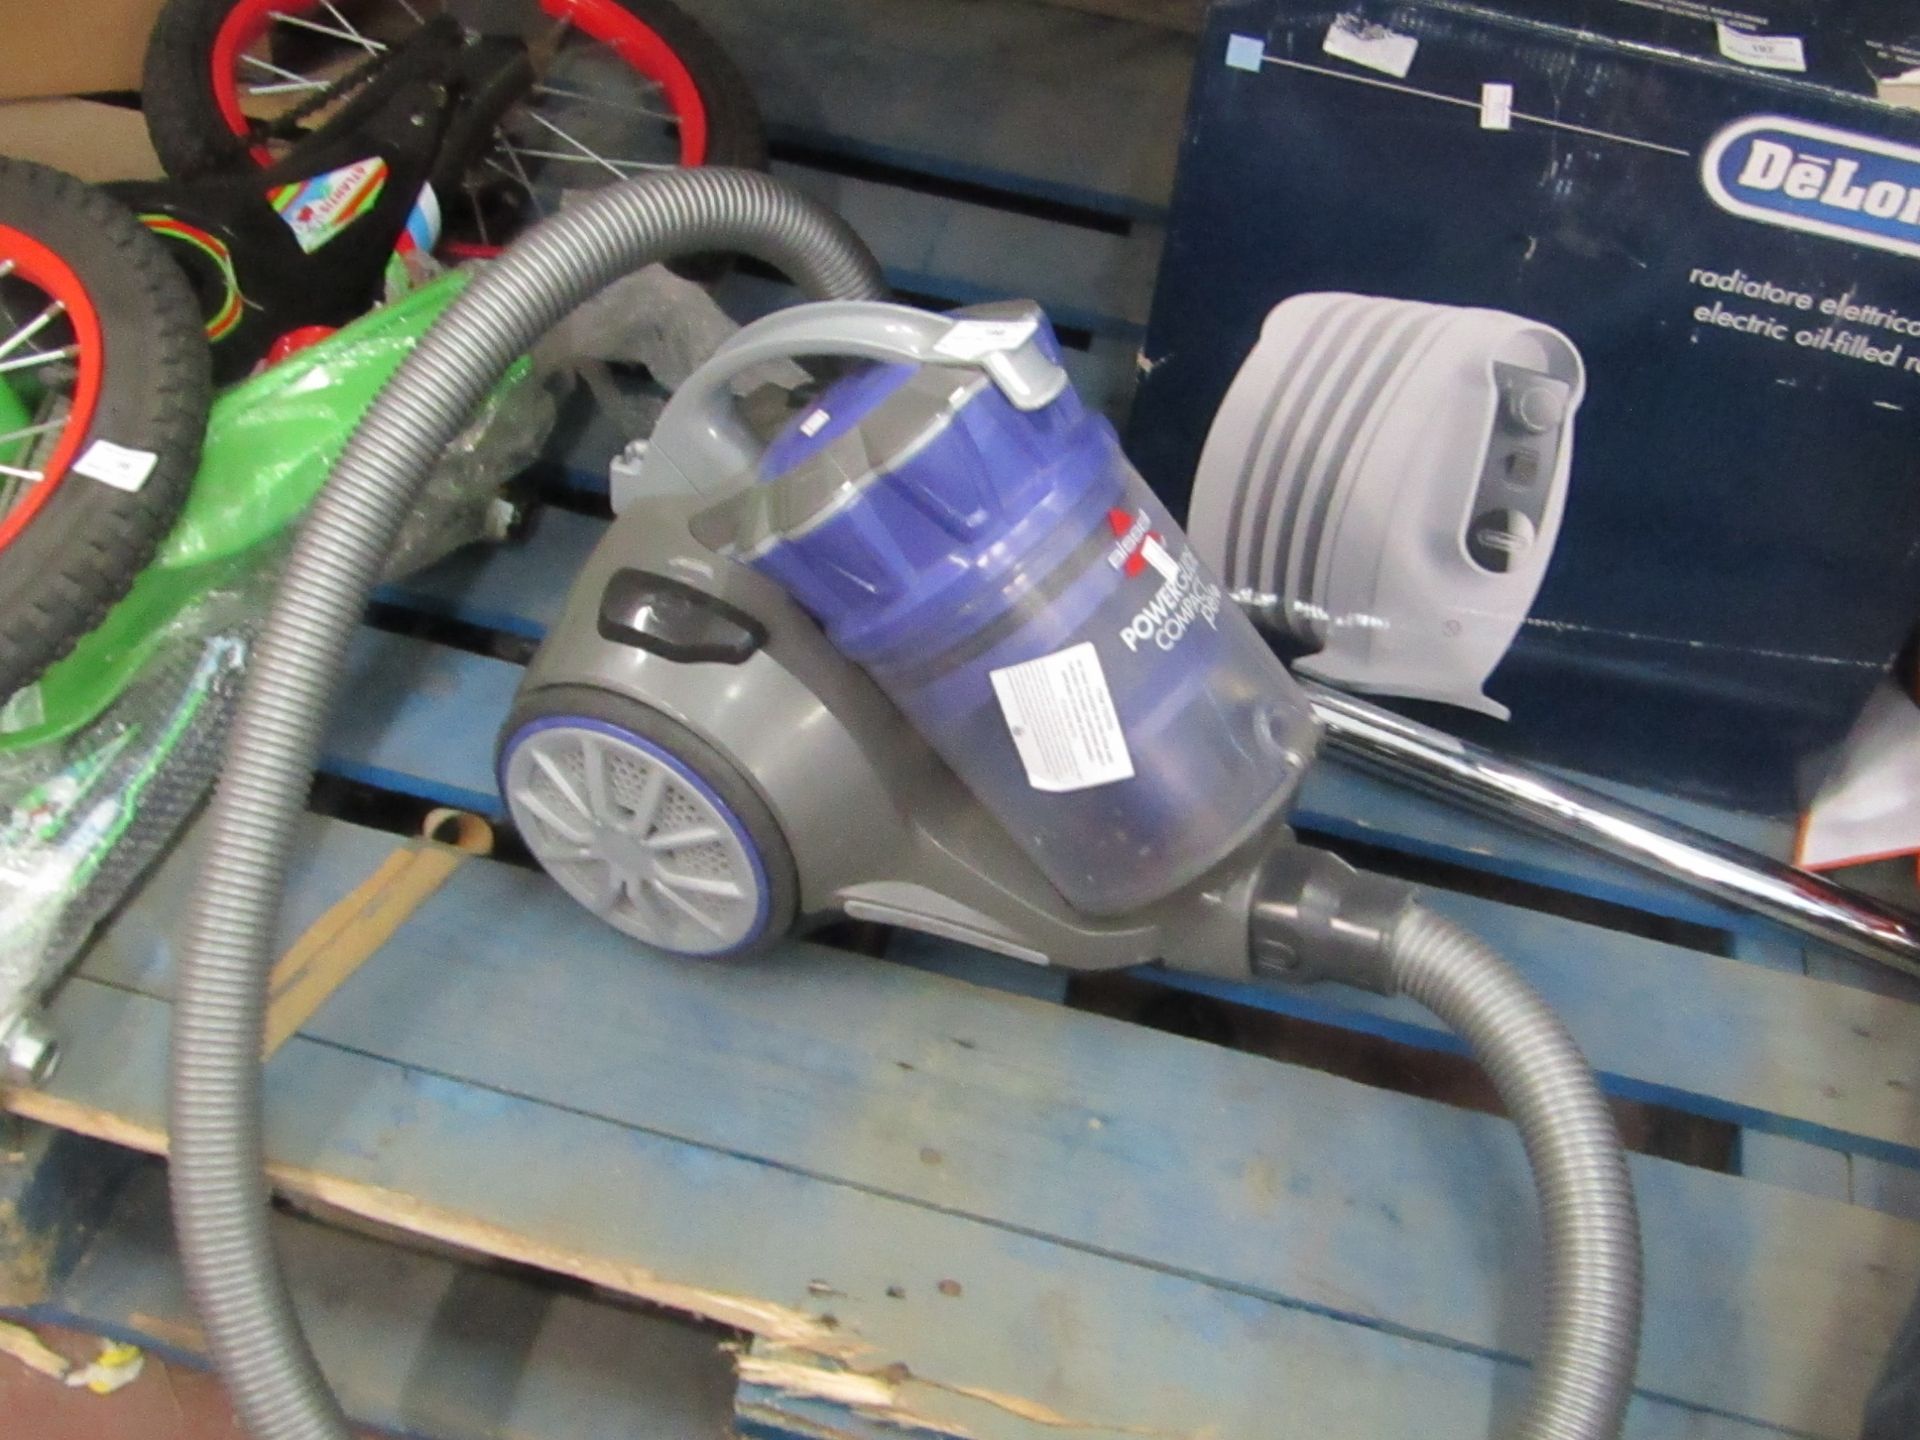 Bissell powerglide compact vet vacuum. Tested working.